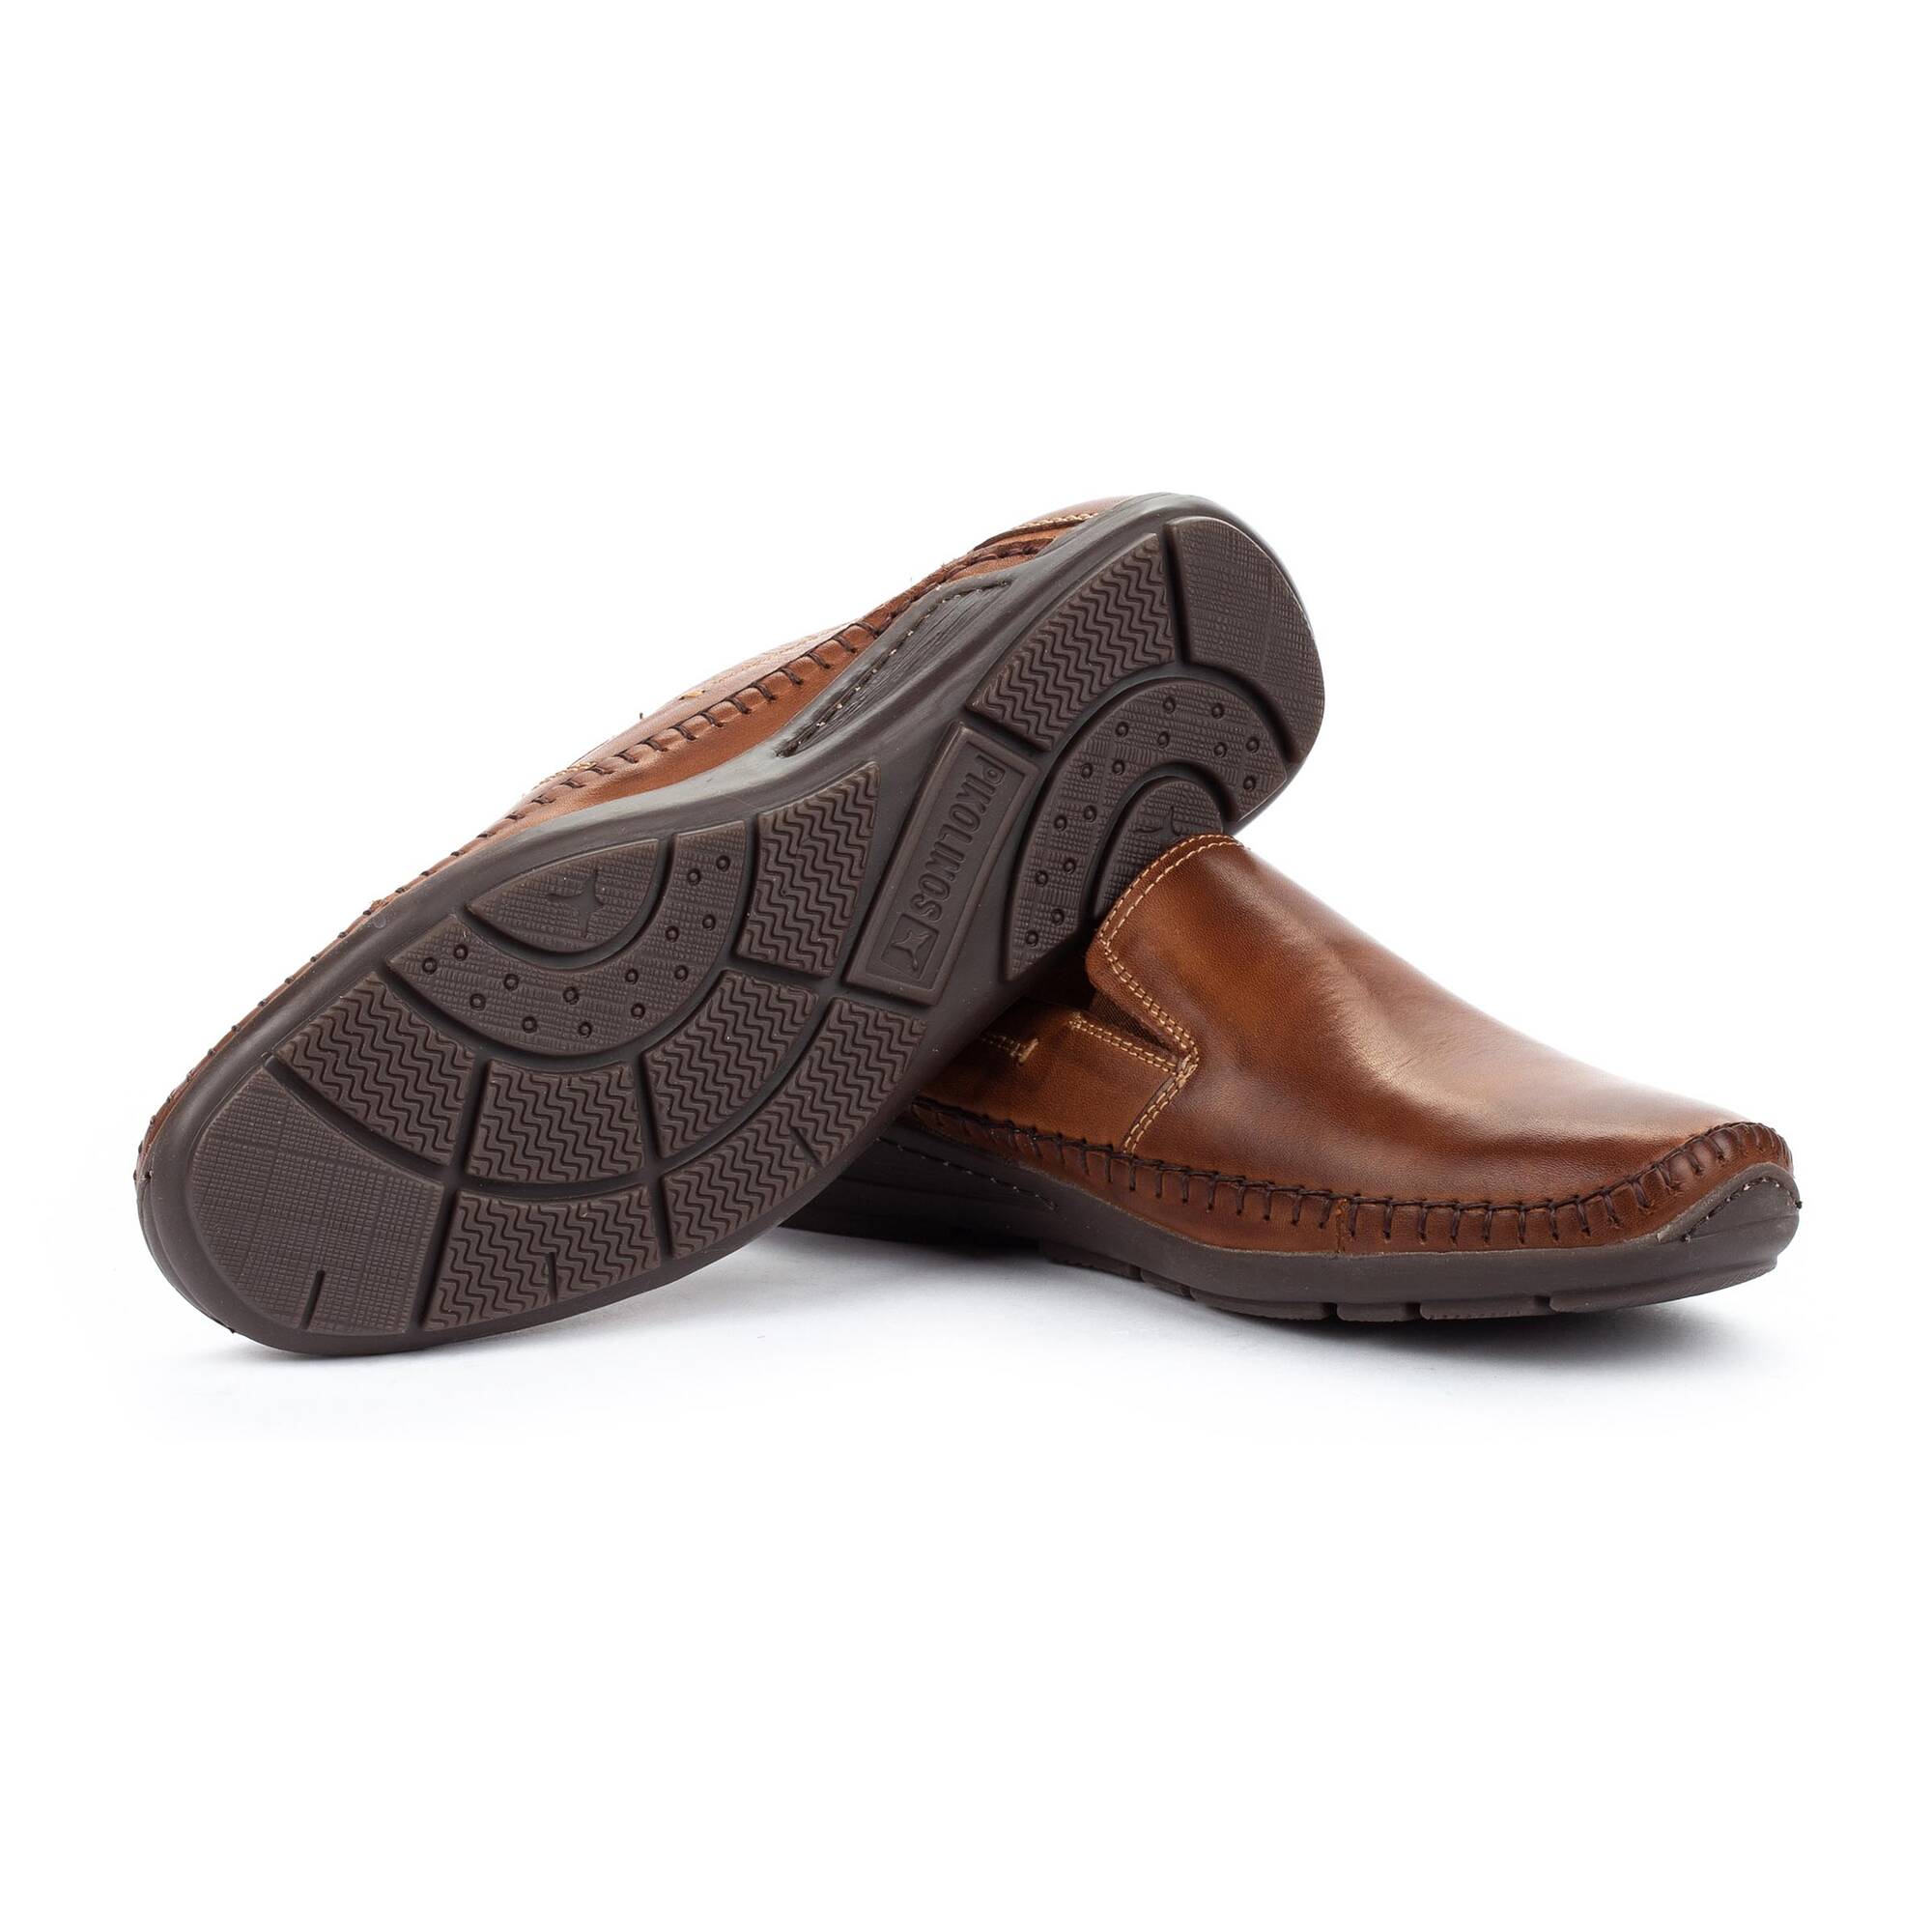 'Azores' men's loafer - Pikolinos - Chaplinshoes'Azores' men's loafer - PikolinosPikolinos